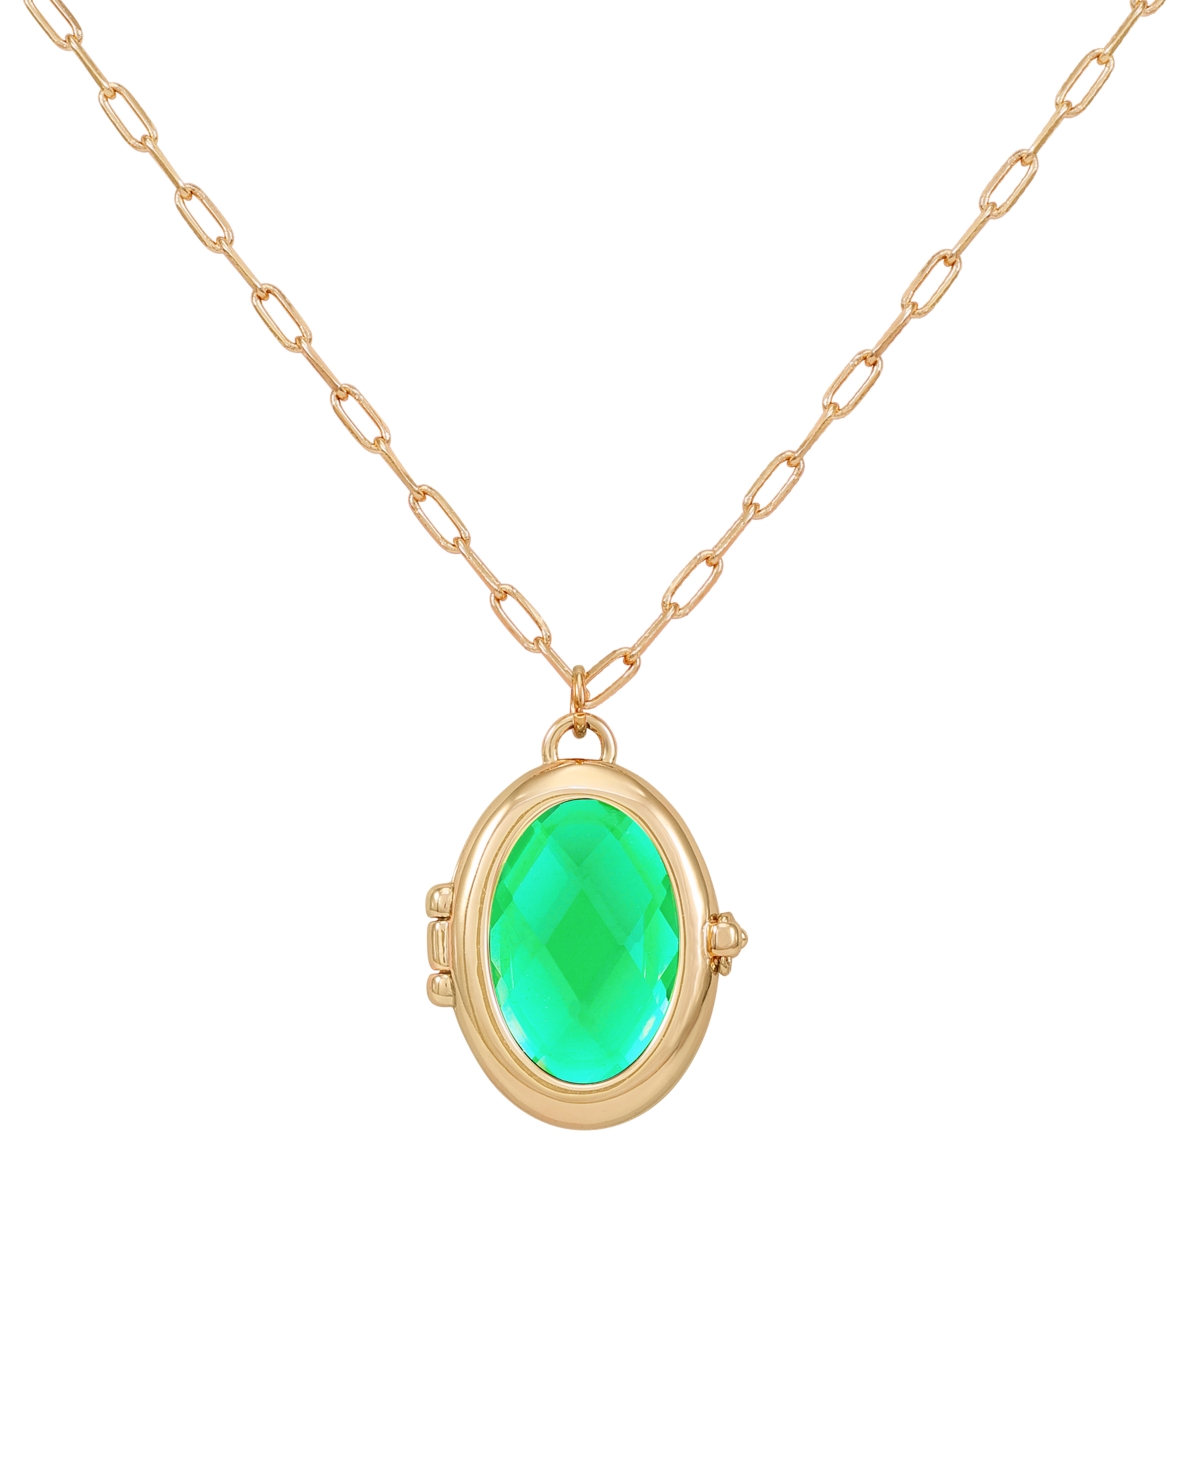 Guess Gold-tone Removable Stone Oval Locket Pendant Necklace, 18" + 3" Extender In Emerald